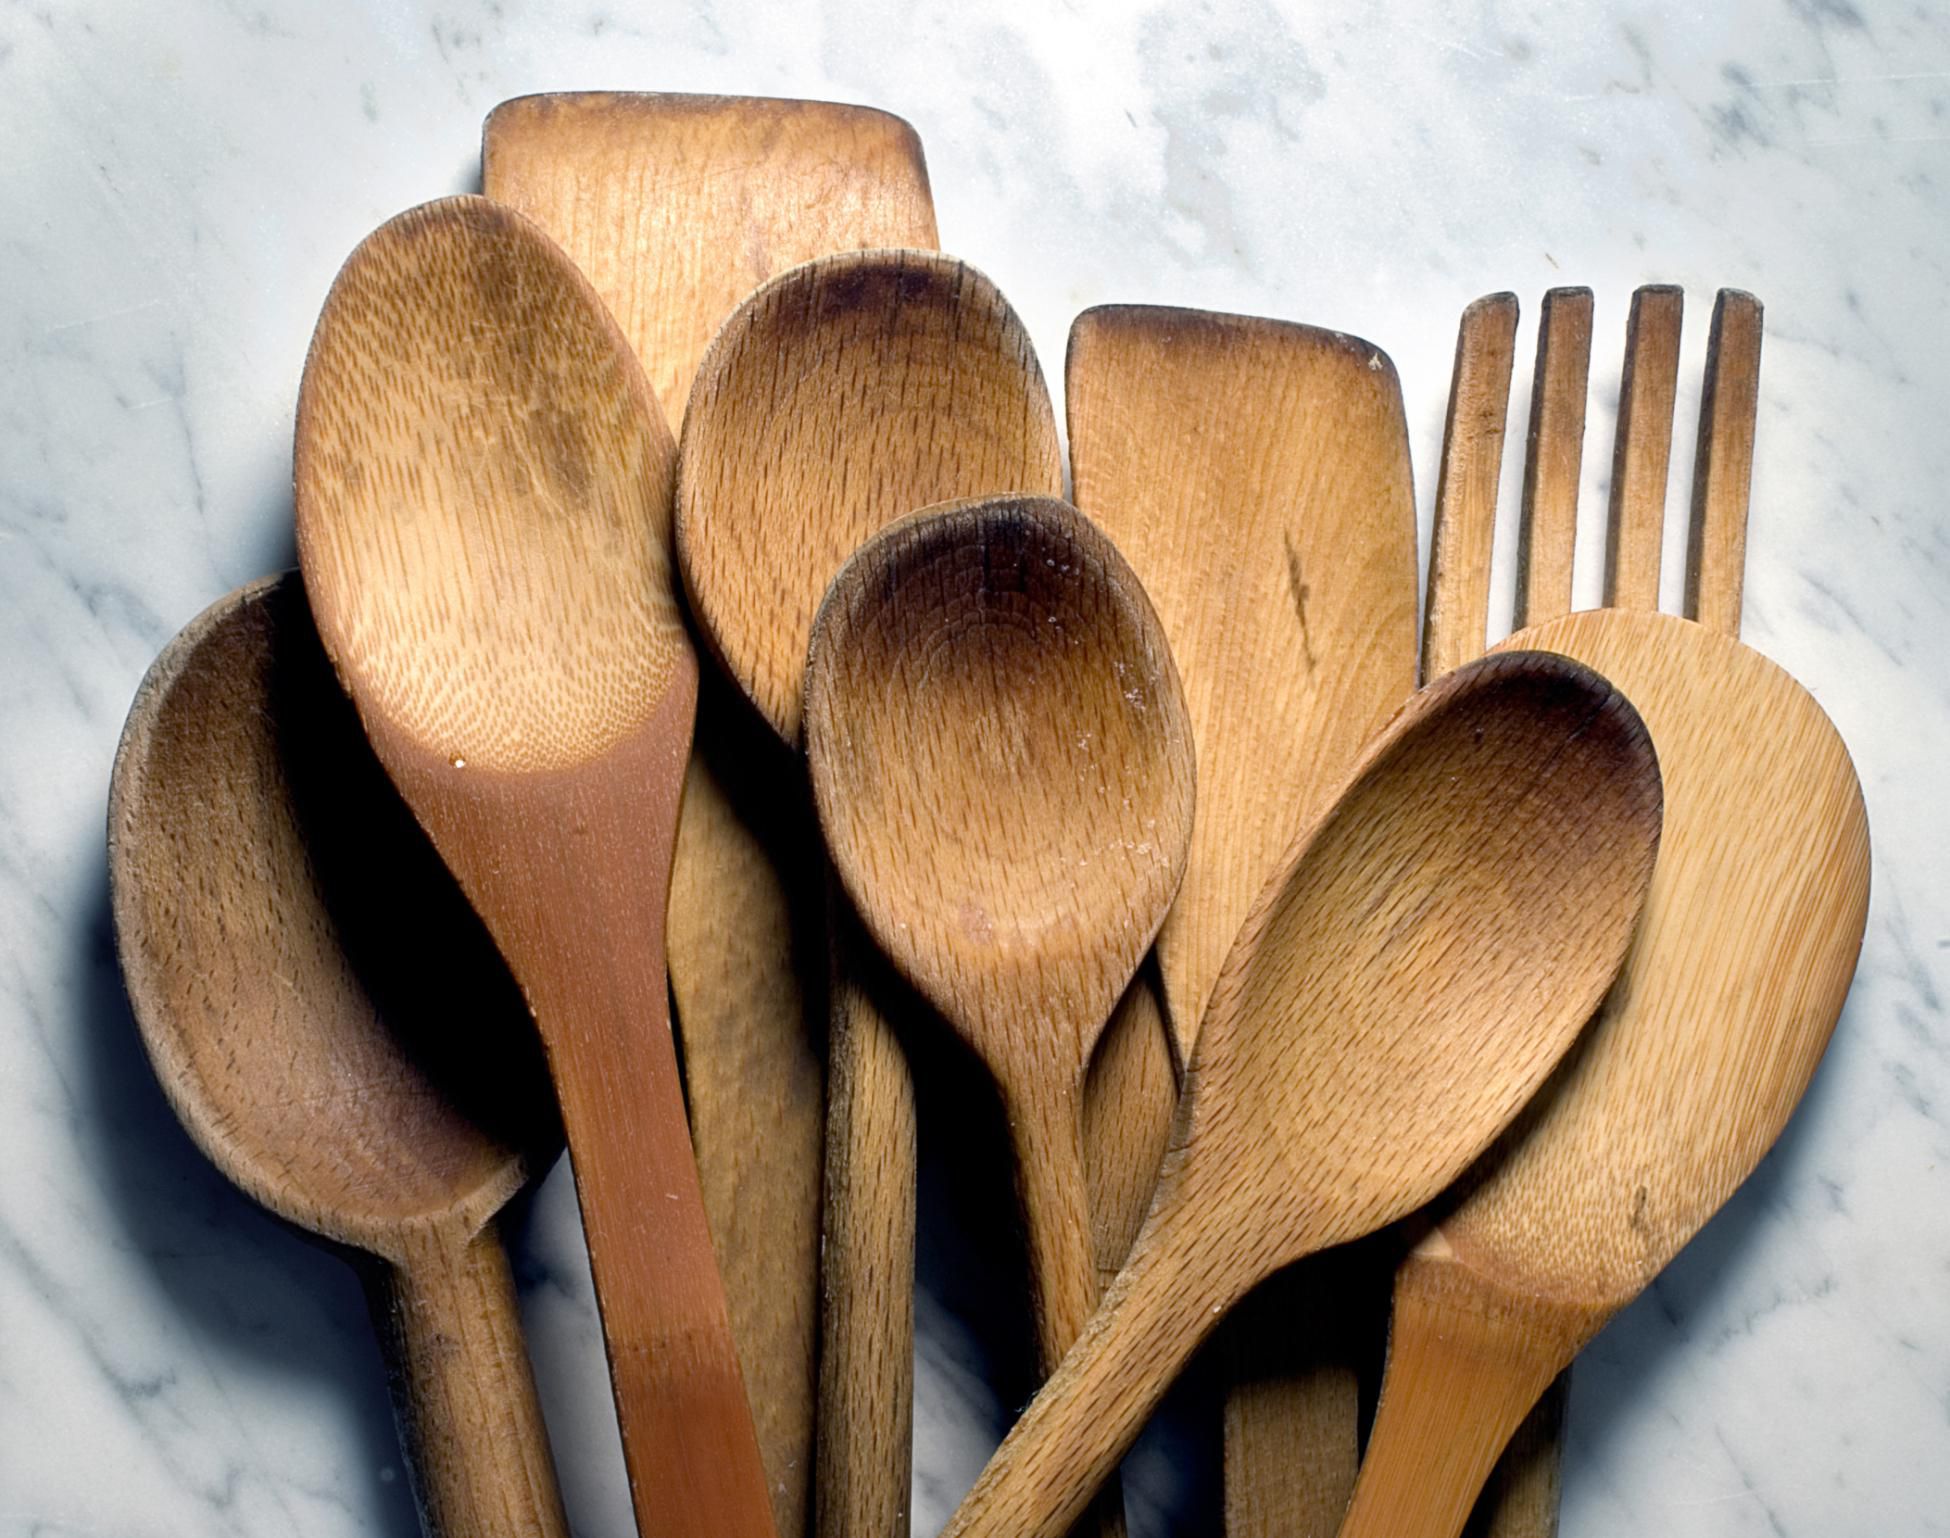 Caring for Wooden Spoons and Other Utensils